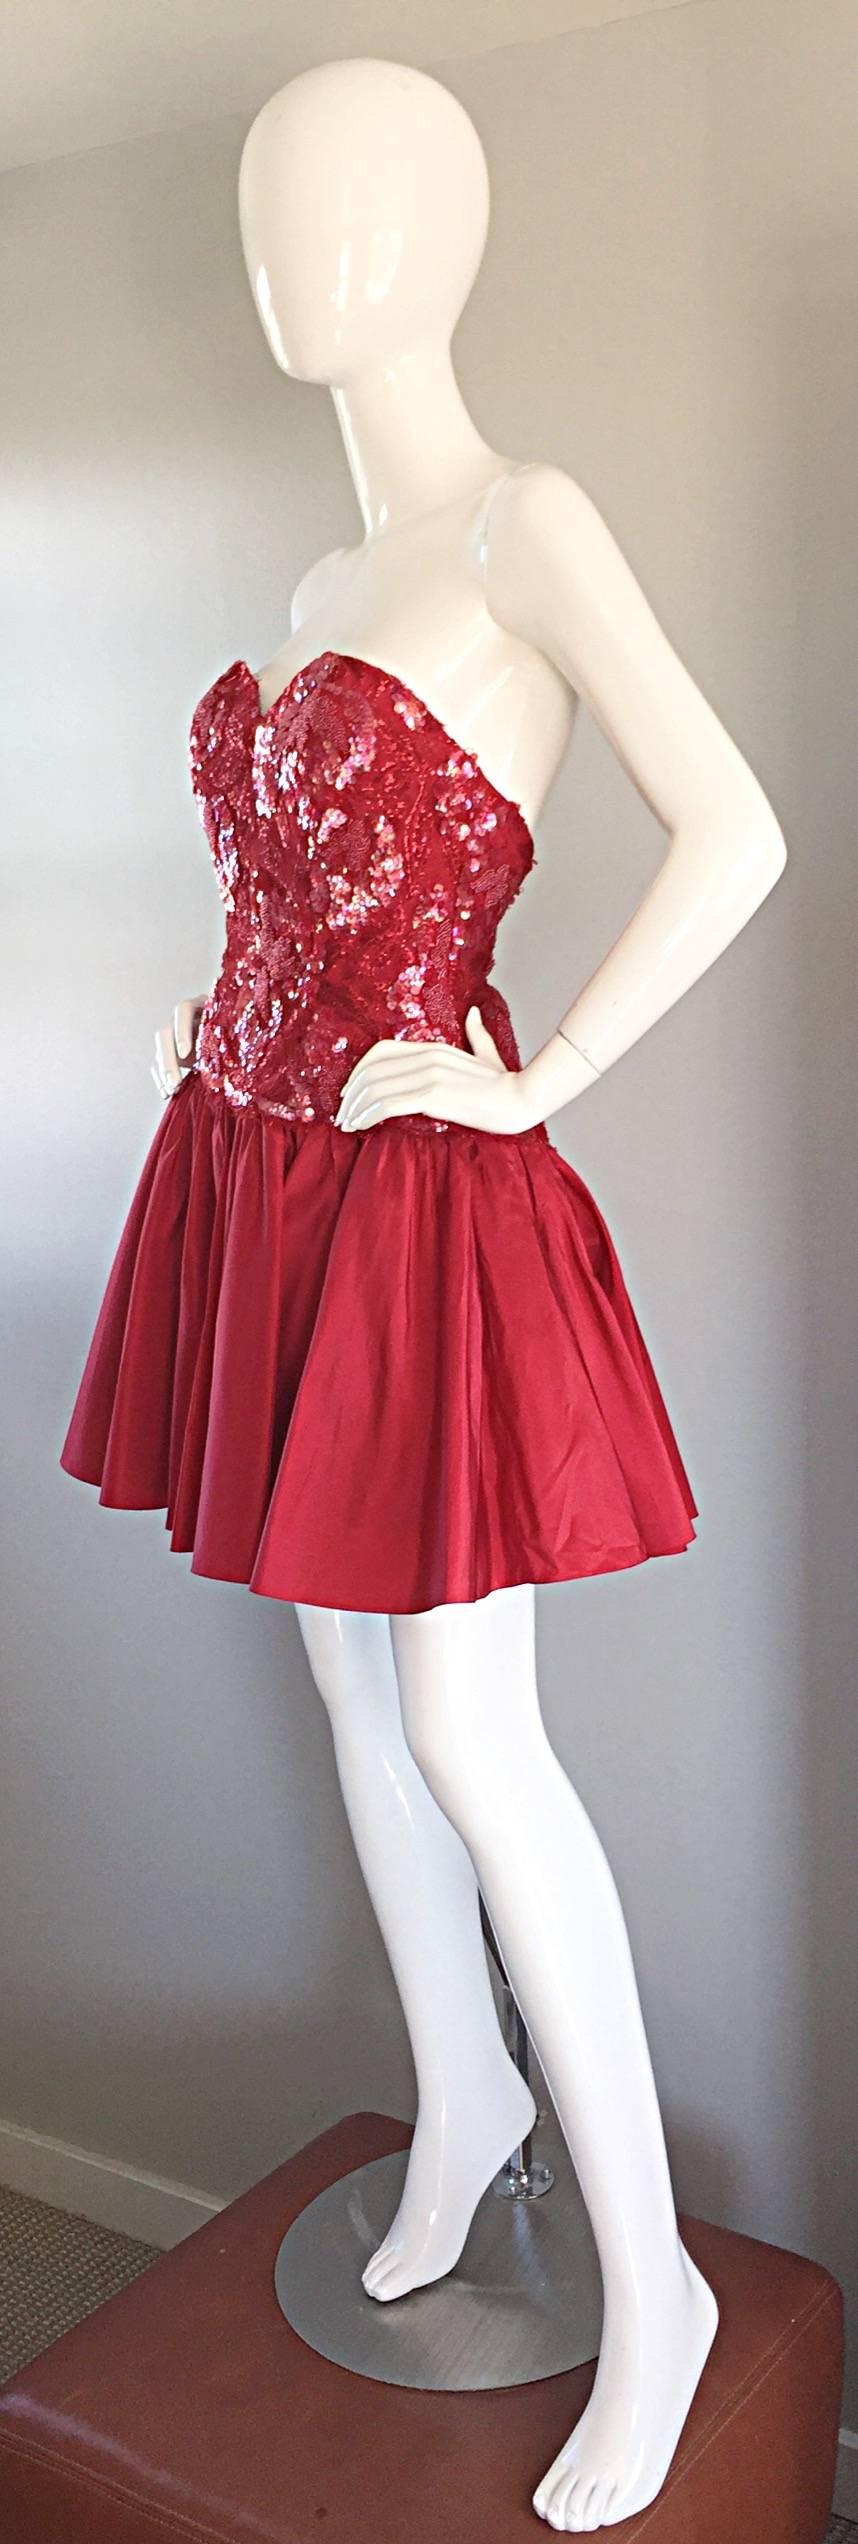 candy apple red dresses